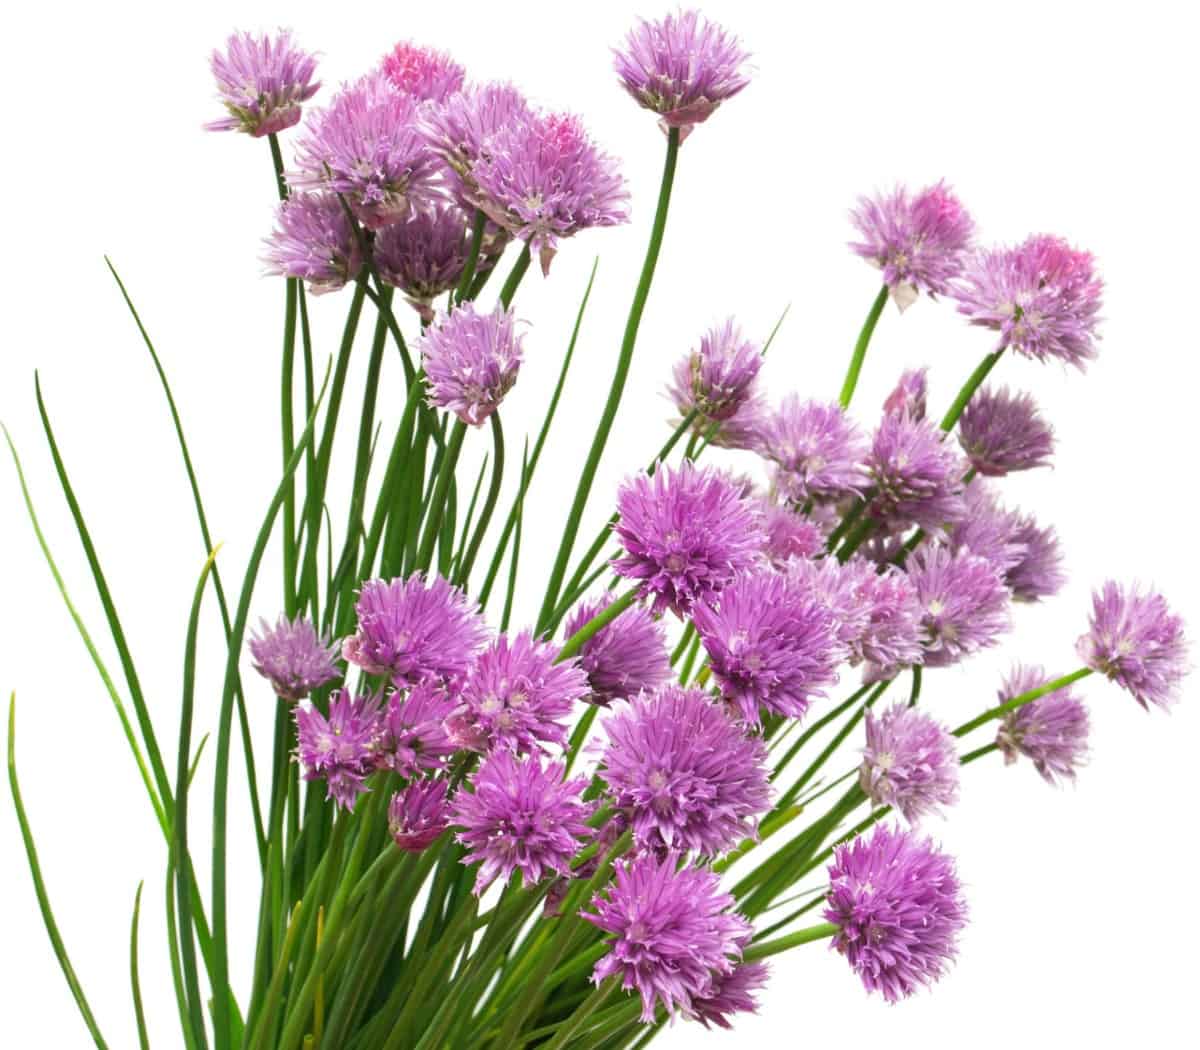 Chives are easy to grow and harvest for cooking.